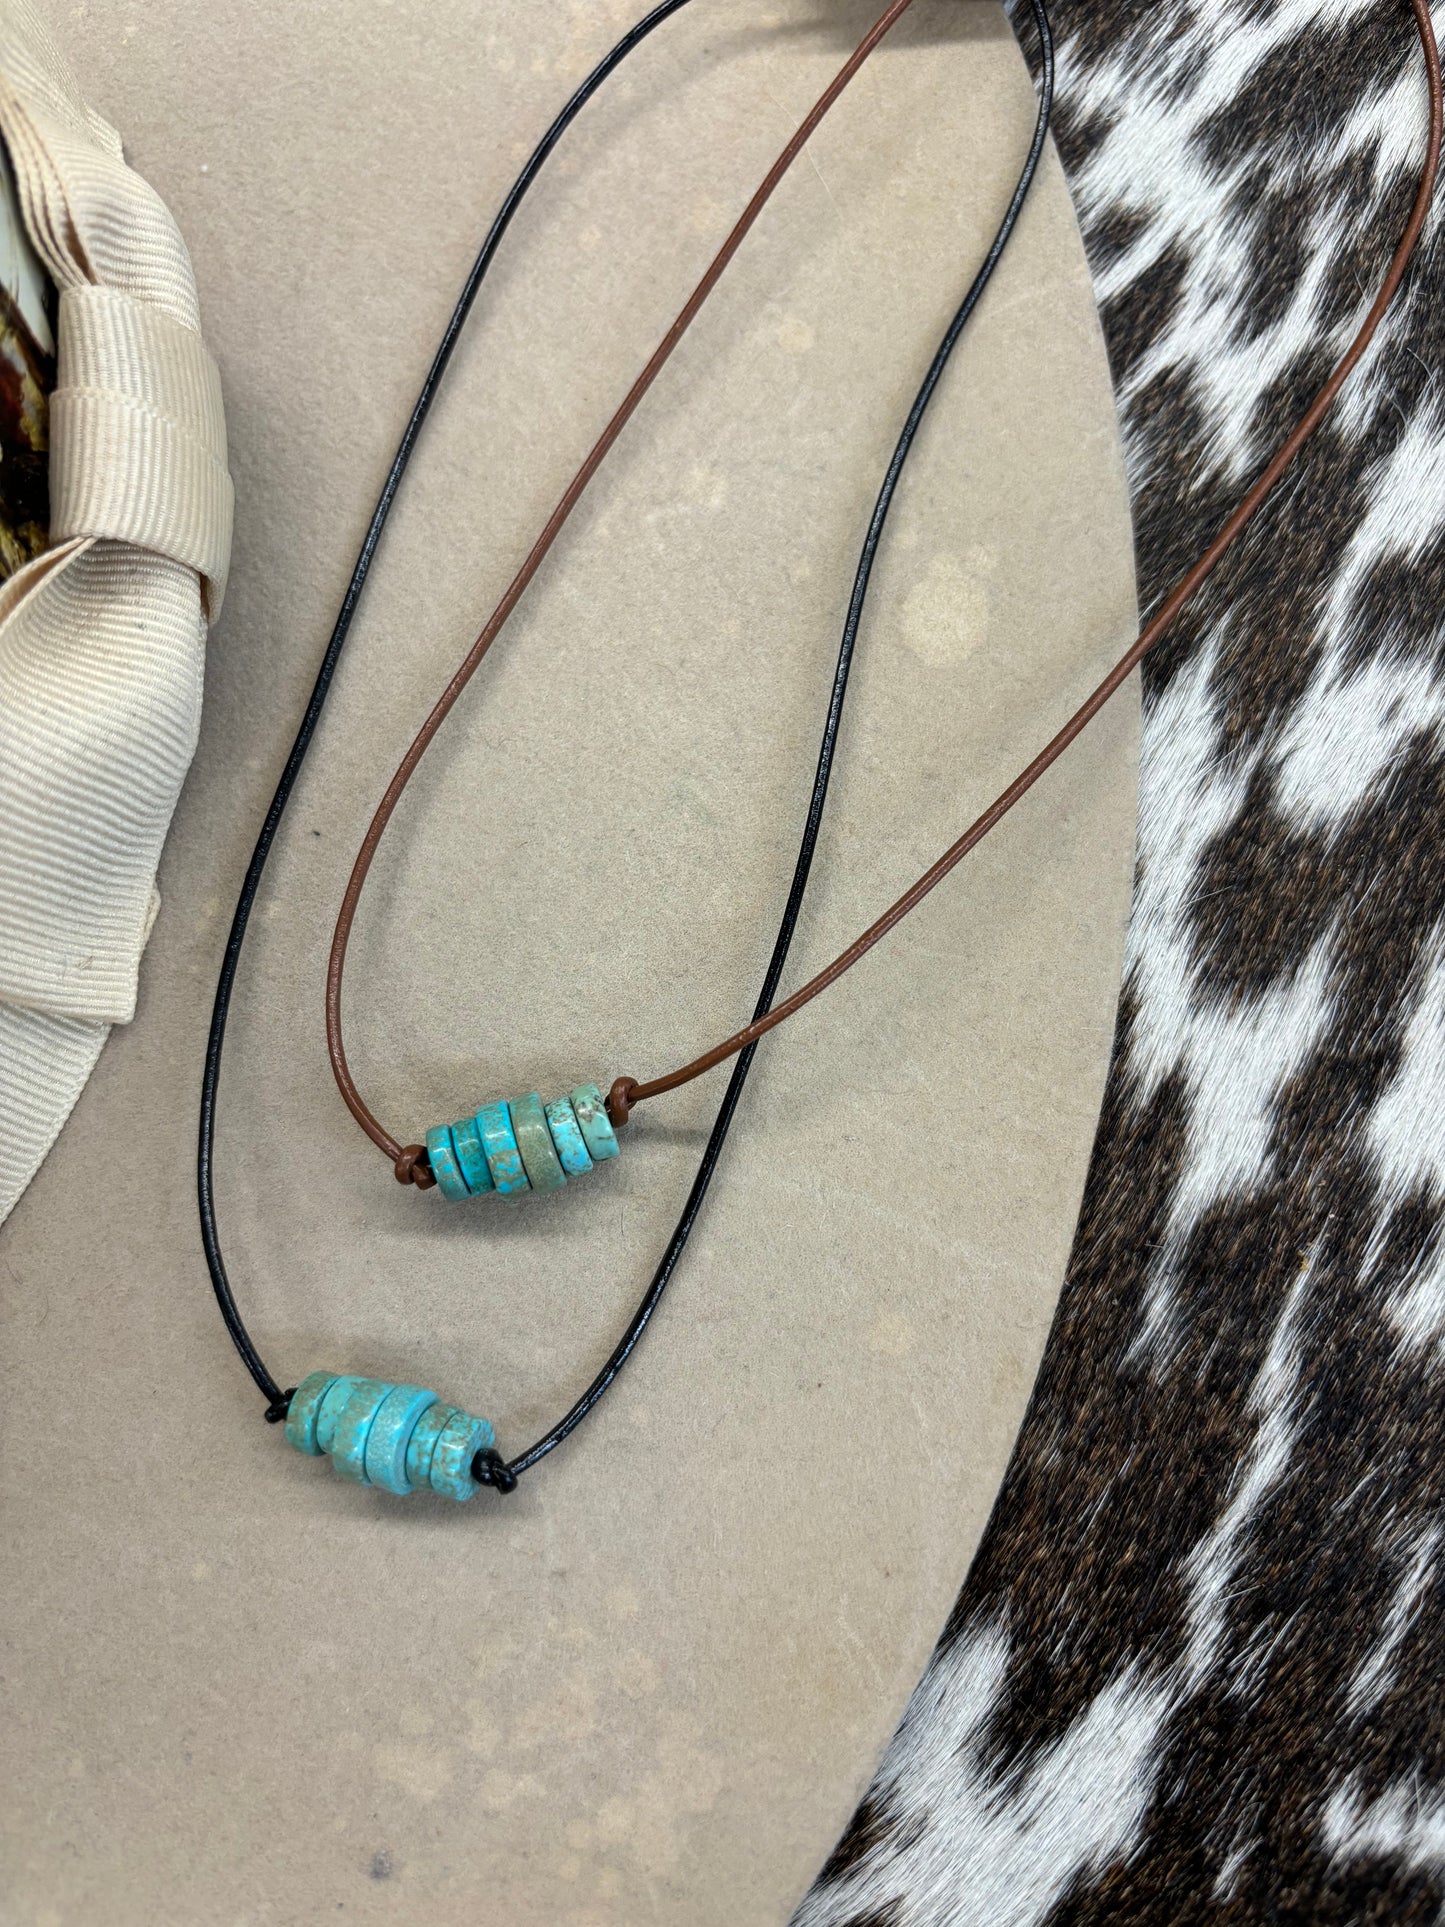 The Turquoise & Leather Necklace